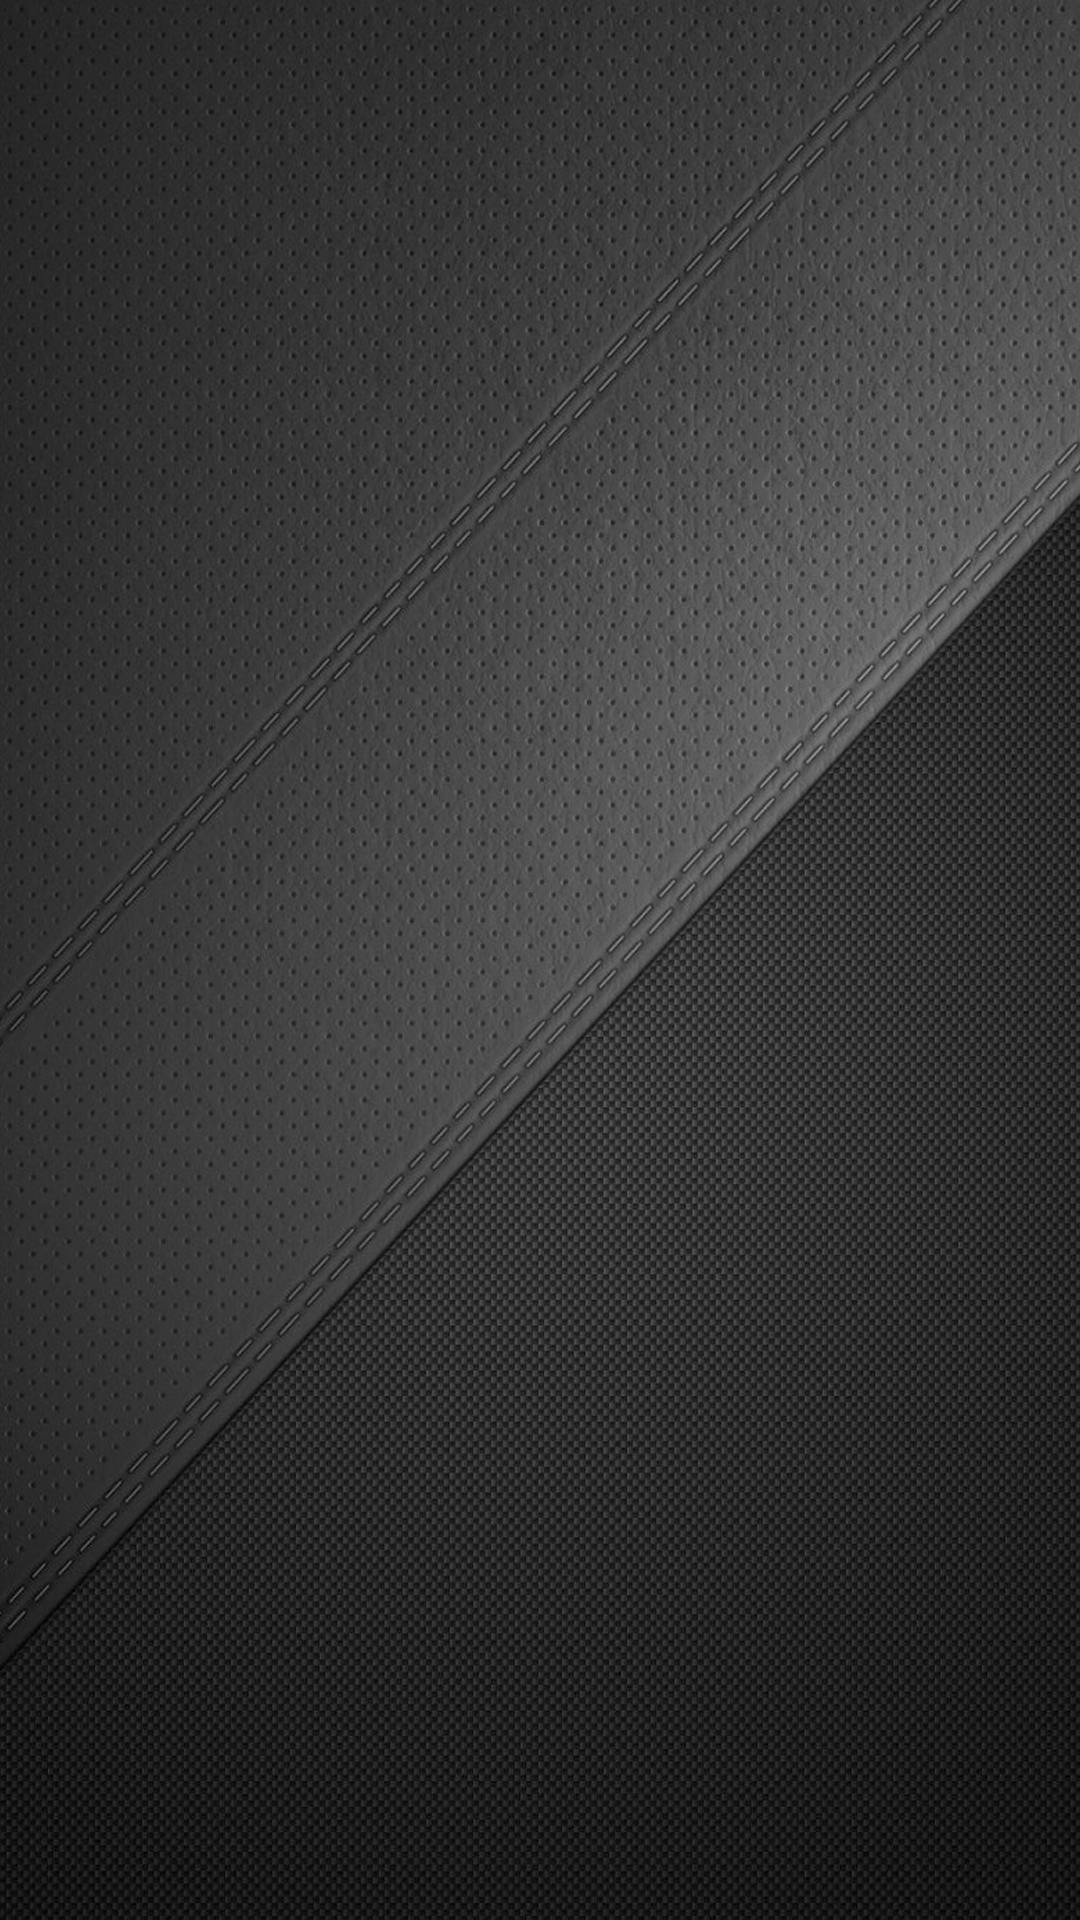 Leather htc one wallpaper htc one wallpaper, free and easy